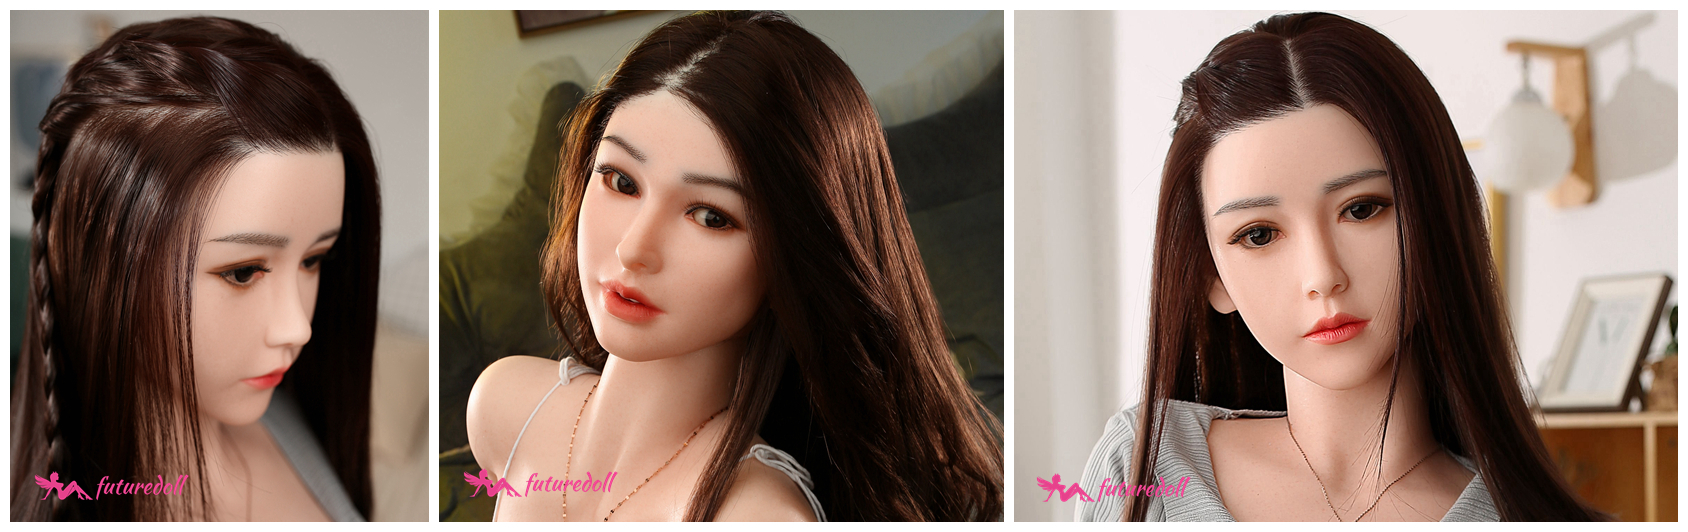 Premium Silikon Sexpuppen Asian Love Doll 165cm Real Silicone Sex Doll Japanese Pop Star Sex Doll Premium Silikon Sexpuppen Asian Love Doll 165cm Silicone Sex Doll Pop Star Sex Doll